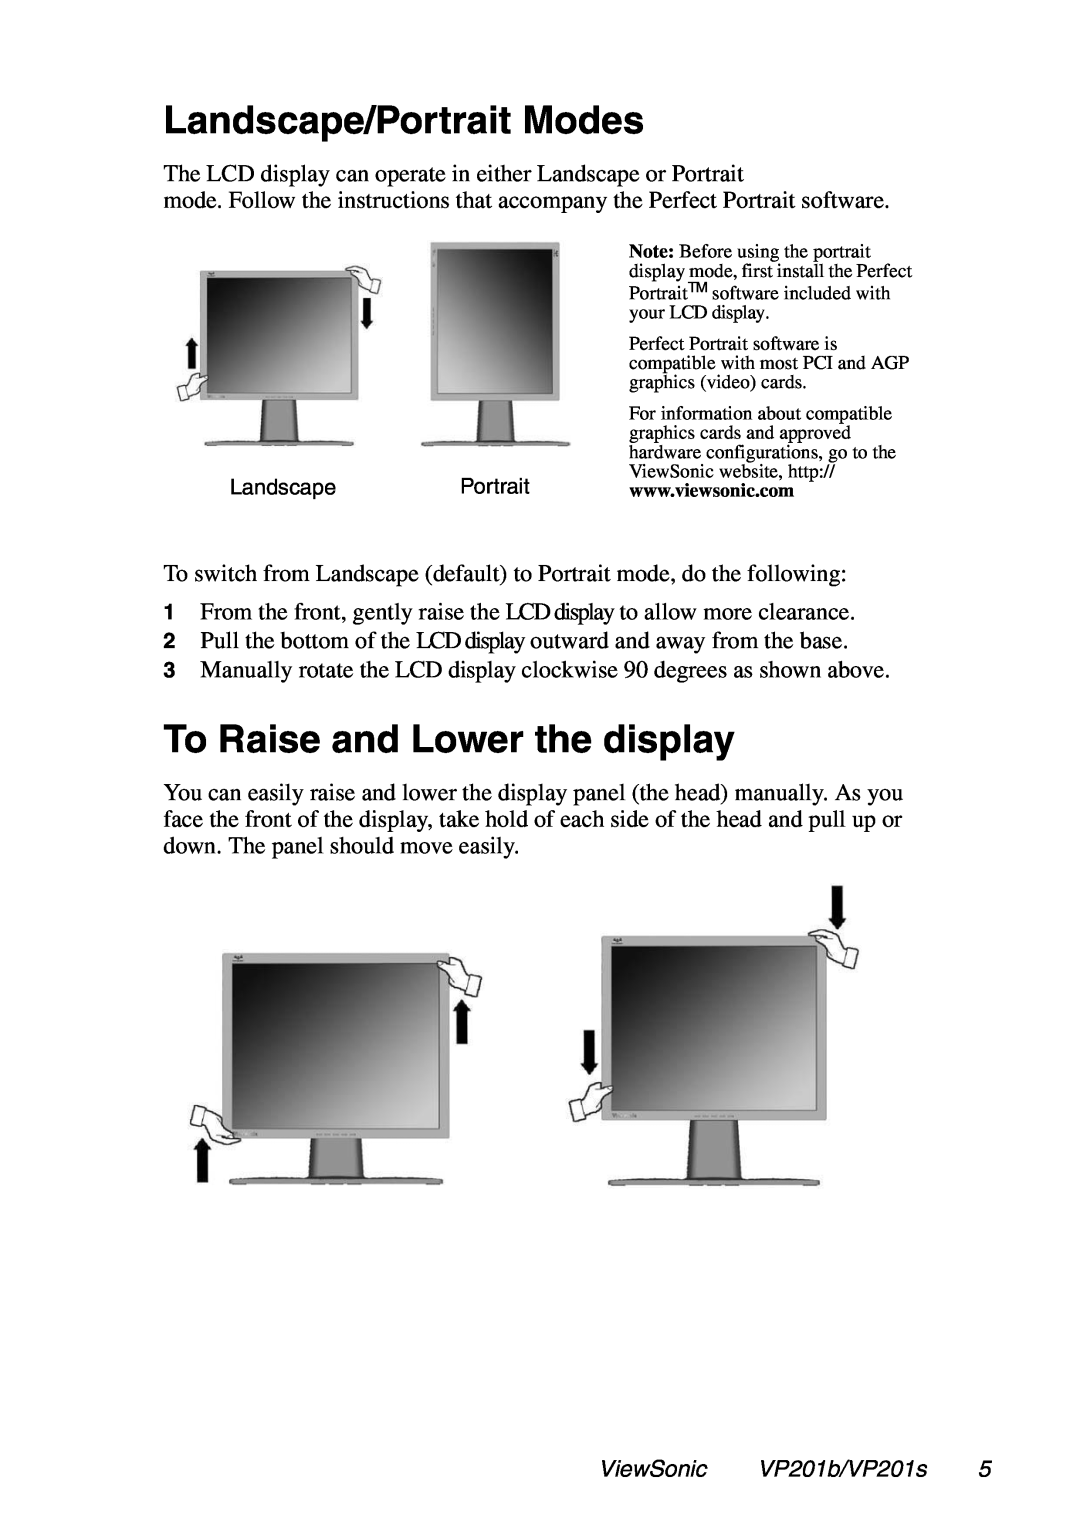 ViewSonic VP201b, VP201s manual Landscape/Portrait Modes, To Raise and Lower the display 